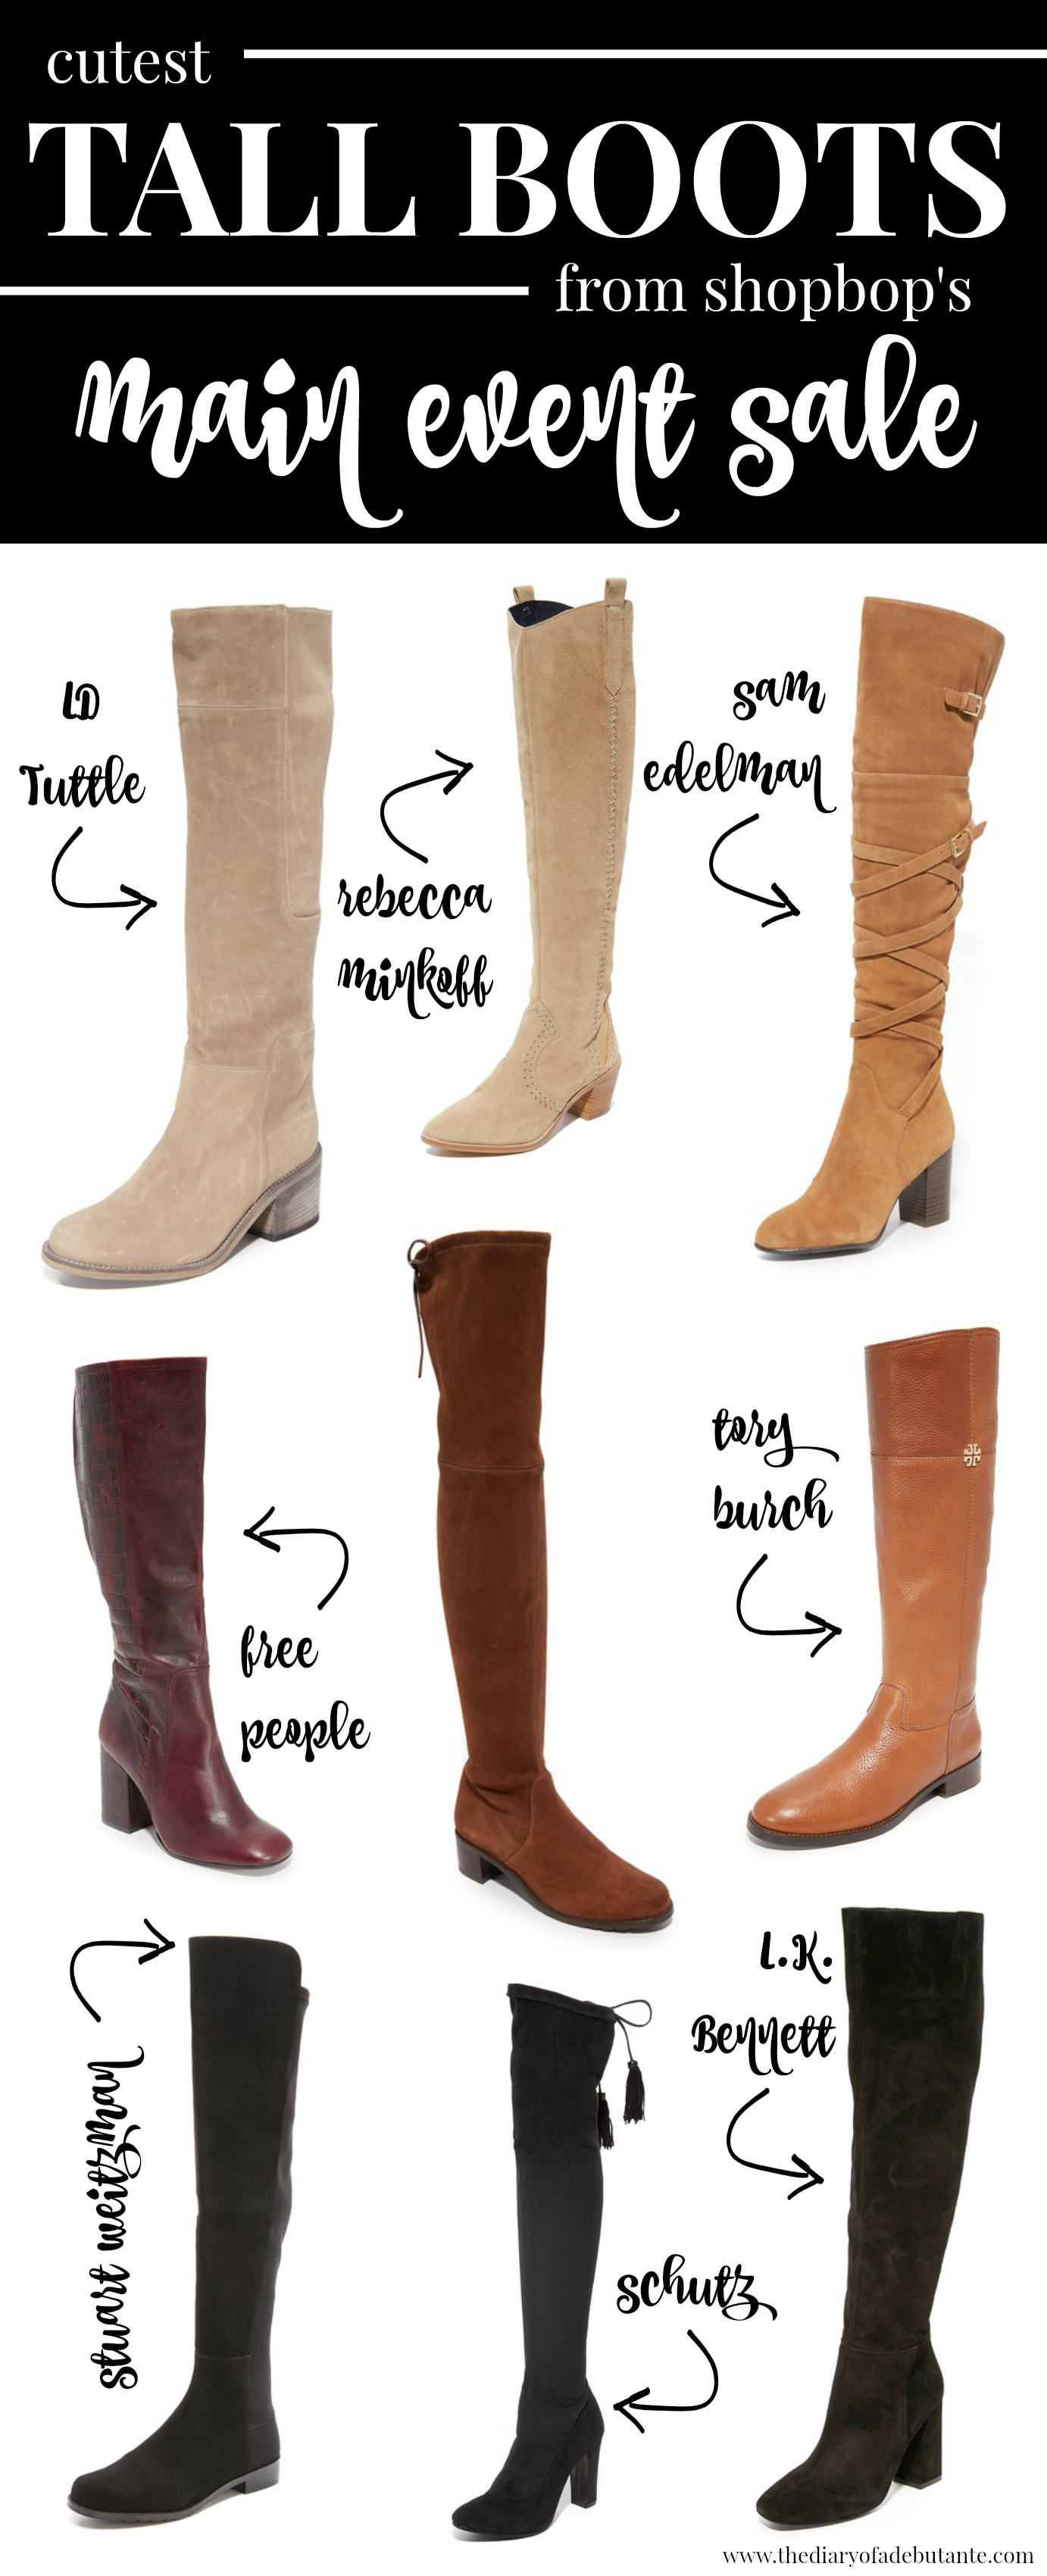 The cutest designer OTK and tall boots on sale during Shopbop's 2016 Main Event promotion